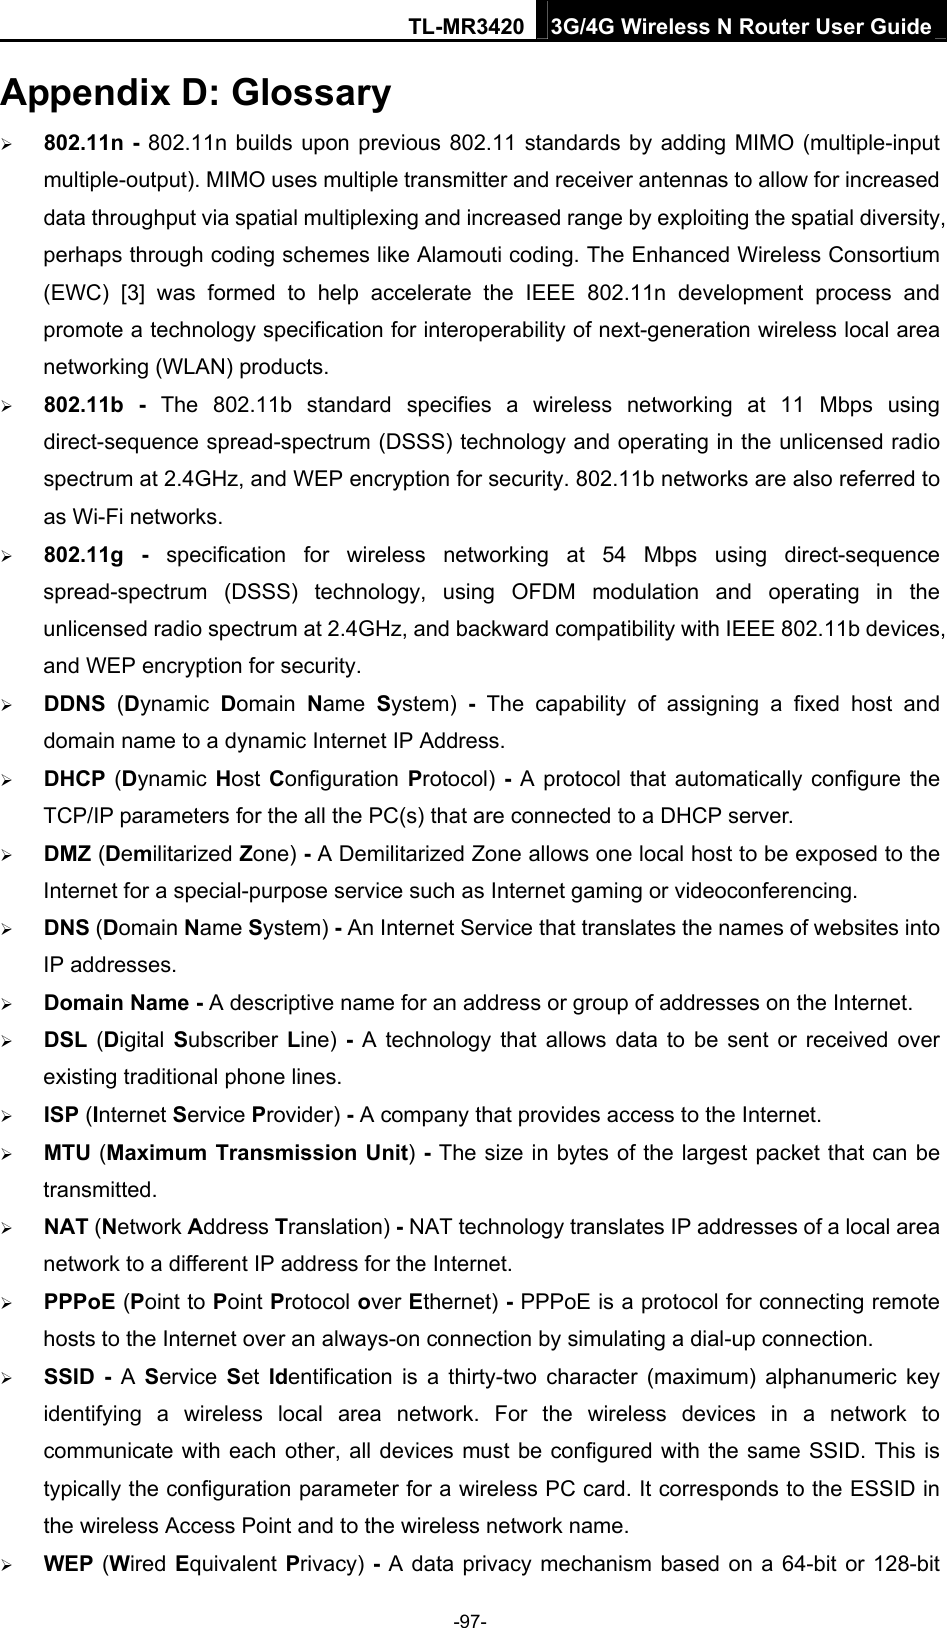 TL-MR3420 3G/4G Wireless N Router User Guide Appendix D: Glossary  802.11n - 802.11n builds upon previous 802.11 standards by adding MIMO (multiple-input multiple-output). MIMO uses multiple transmitter and receiver antennas to allow for increased data throughput via spatial multiplexing and increased range by exploiting the spatial diversity, perhaps through coding schemes like Alamouti coding. The Enhanced Wireless Consortium (EWC) [3] was formed to help accelerate the IEEE 802.11n development process and promote a technology specification for interoperability of next-generation wireless local area networking (WLAN) products.  802.11b - The 802.11b standard specifies a wireless networking at 11 Mbps using direct-sequence spread-spectrum (DSSS) technology and operating in the unlicensed radio spectrum at 2.4GHz, and WEP encryption for security. 802.11b networks are also referred to as Wi-Fi networks.  802.11g - specification for wireless networking at 54 Mbps using direct-sequence spread-spectrum (DSSS) technology, using OFDM modulation and operating in the unlicensed radio spectrum at 2.4GHz, and backward compatibility with IEEE 802.11b devices, and WEP encryption for security.  DDNS  (Dynamic  Domain  Name  System) - The capability of assigning a fixed host and domain name to a dynamic Internet IP Address.    DHCP  (Dynamic Host  Configuration Protocol) - A protocol that automatically configure the TCP/IP parameters for the all the PC(s) that are connected to a DHCP server.  DMZ (Demilitarized Zone) - A Demilitarized Zone allows one local host to be exposed to the Internet for a special-purpose service such as Internet gaming or videoconferencing.  DNS (Domain Name System) - An Internet Service that translates the names of websites into IP addresses.  Domain Name - A descriptive name for an address or group of addresses on the Internet.    DSL  (Digital Subscriber  Line)  - A technology that allows data to be sent or received over existing traditional phone lines.  ISP (Internet Service Provider) - A company that provides access to the Internet.  MTU (Maximum Transmission Unit) - The size in bytes of the largest packet that can be transmitted.  NAT (Network Address Translation) - NAT technology translates IP addresses of a local area network to a different IP address for the Internet.  PPPoE (Point to Point Protocol over Ethernet) - PPPoE is a protocol for connecting remote hosts to the Internet over an always-on connection by simulating a dial-up connection.  SSID - A  Service  Set  Identification is a thirty-two character (maximum) alphanumeric key identifying a wireless local area network. For the wireless devices in a network to communicate with each other, all devices must be configured with the same SSID. This is typically the configuration parameter for a wireless PC card. It corresponds to the ESSID in the wireless Access Point and to the wireless network name.    WEP (Wired Equivalent Privacy) - A data privacy mechanism based on a 64-bit or 128-bit -97- 